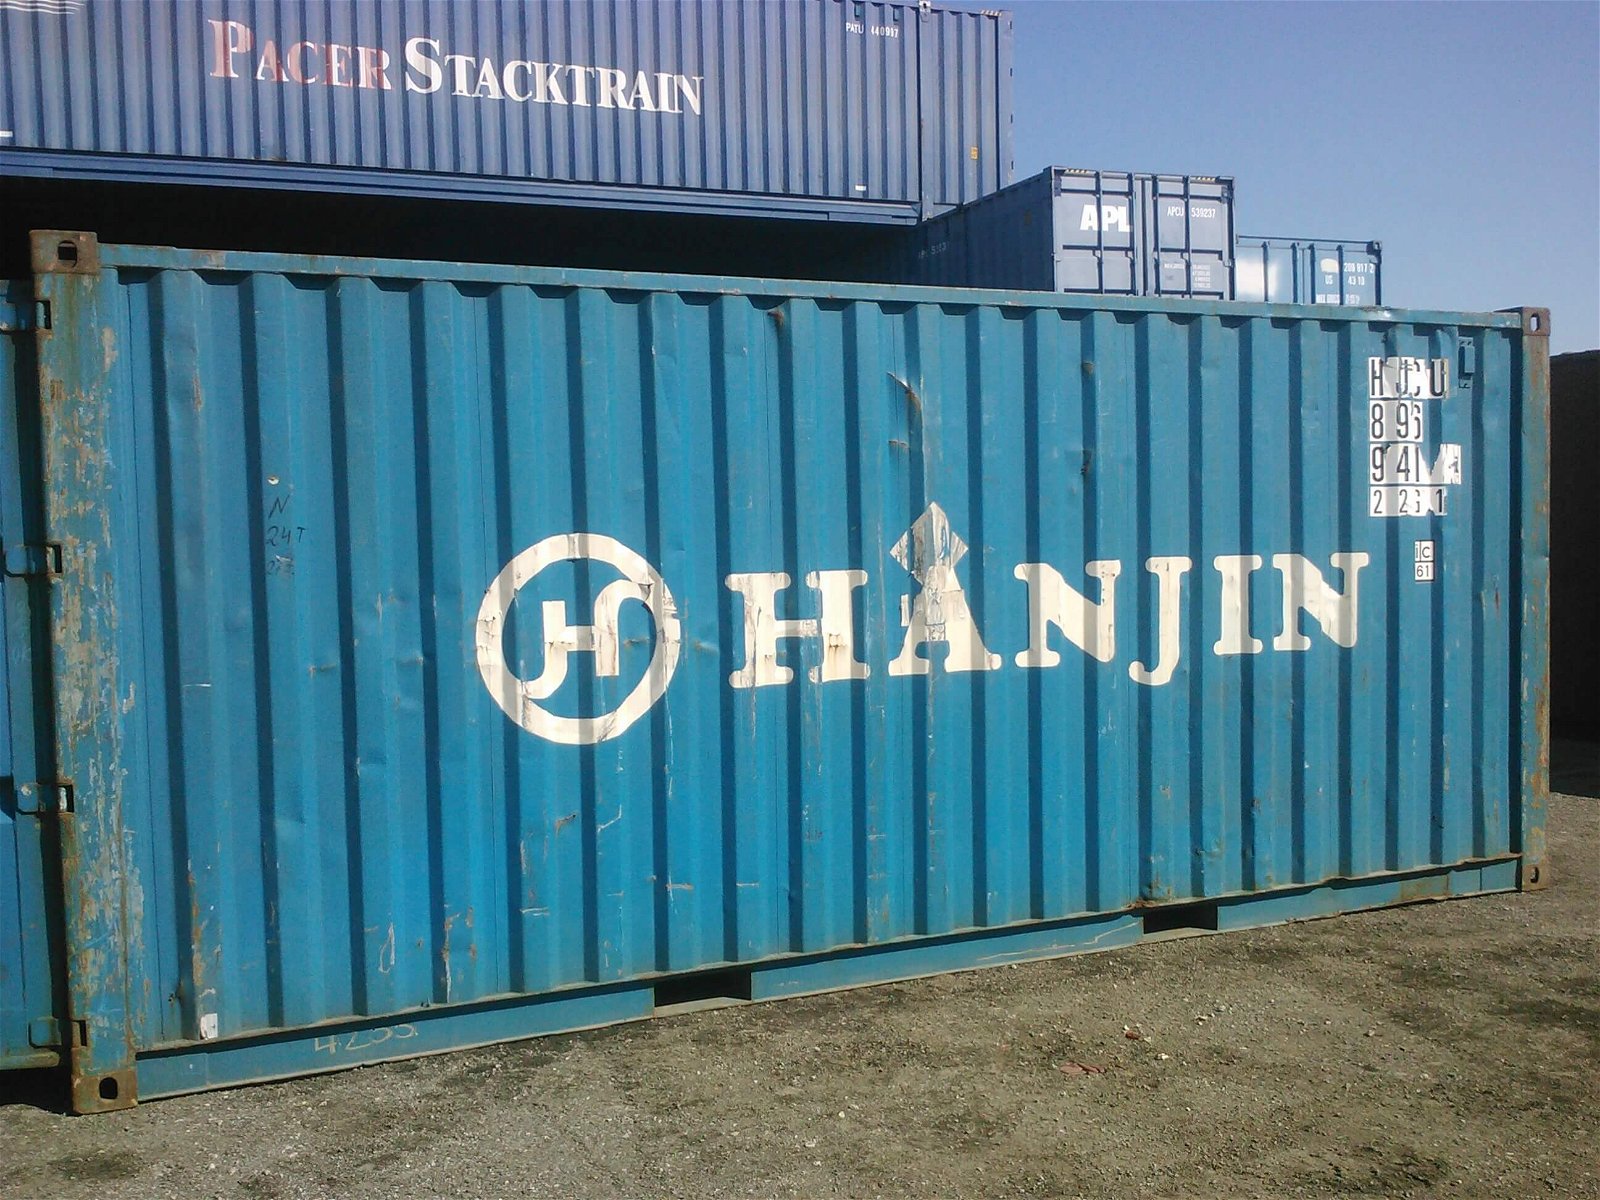 20 Ft Car Shipping Containers & Storage for Sale & Rent